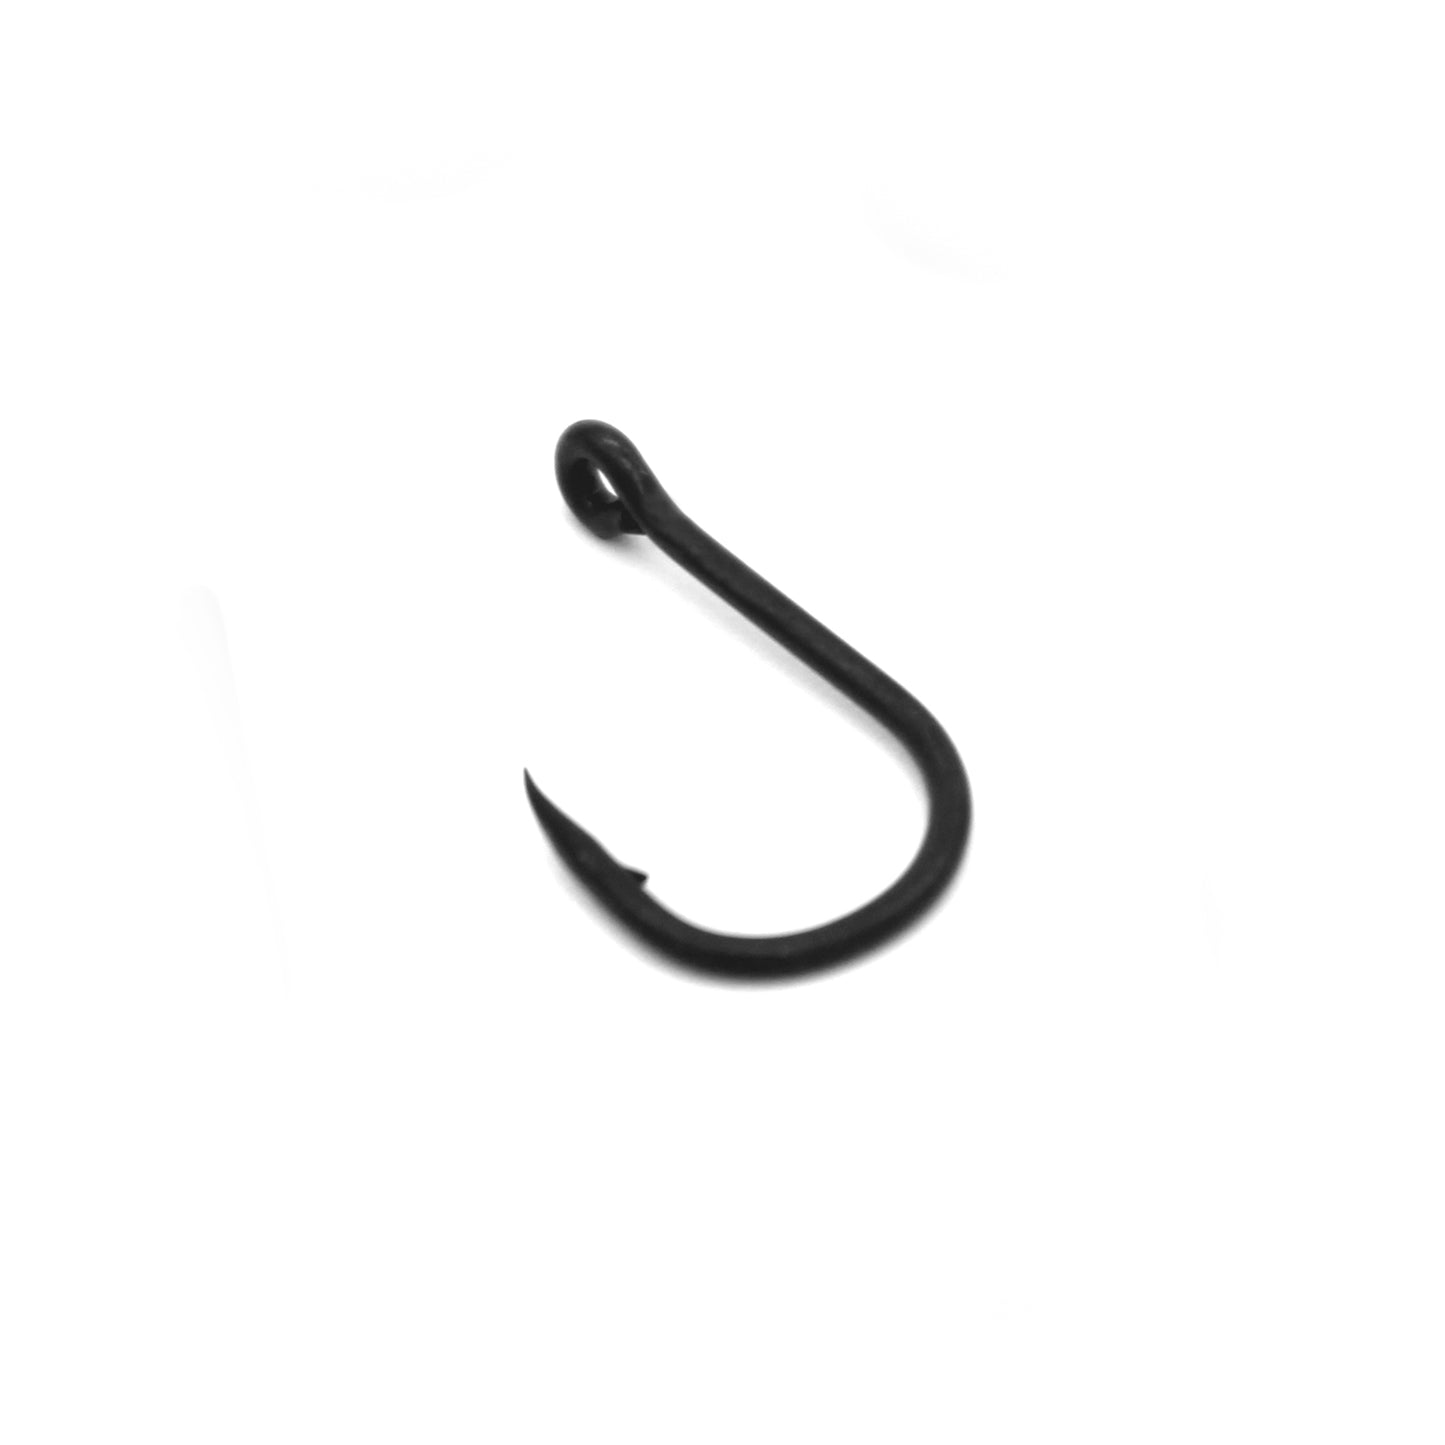 Deception Angling Wide Micro Barbed Fishing Hook